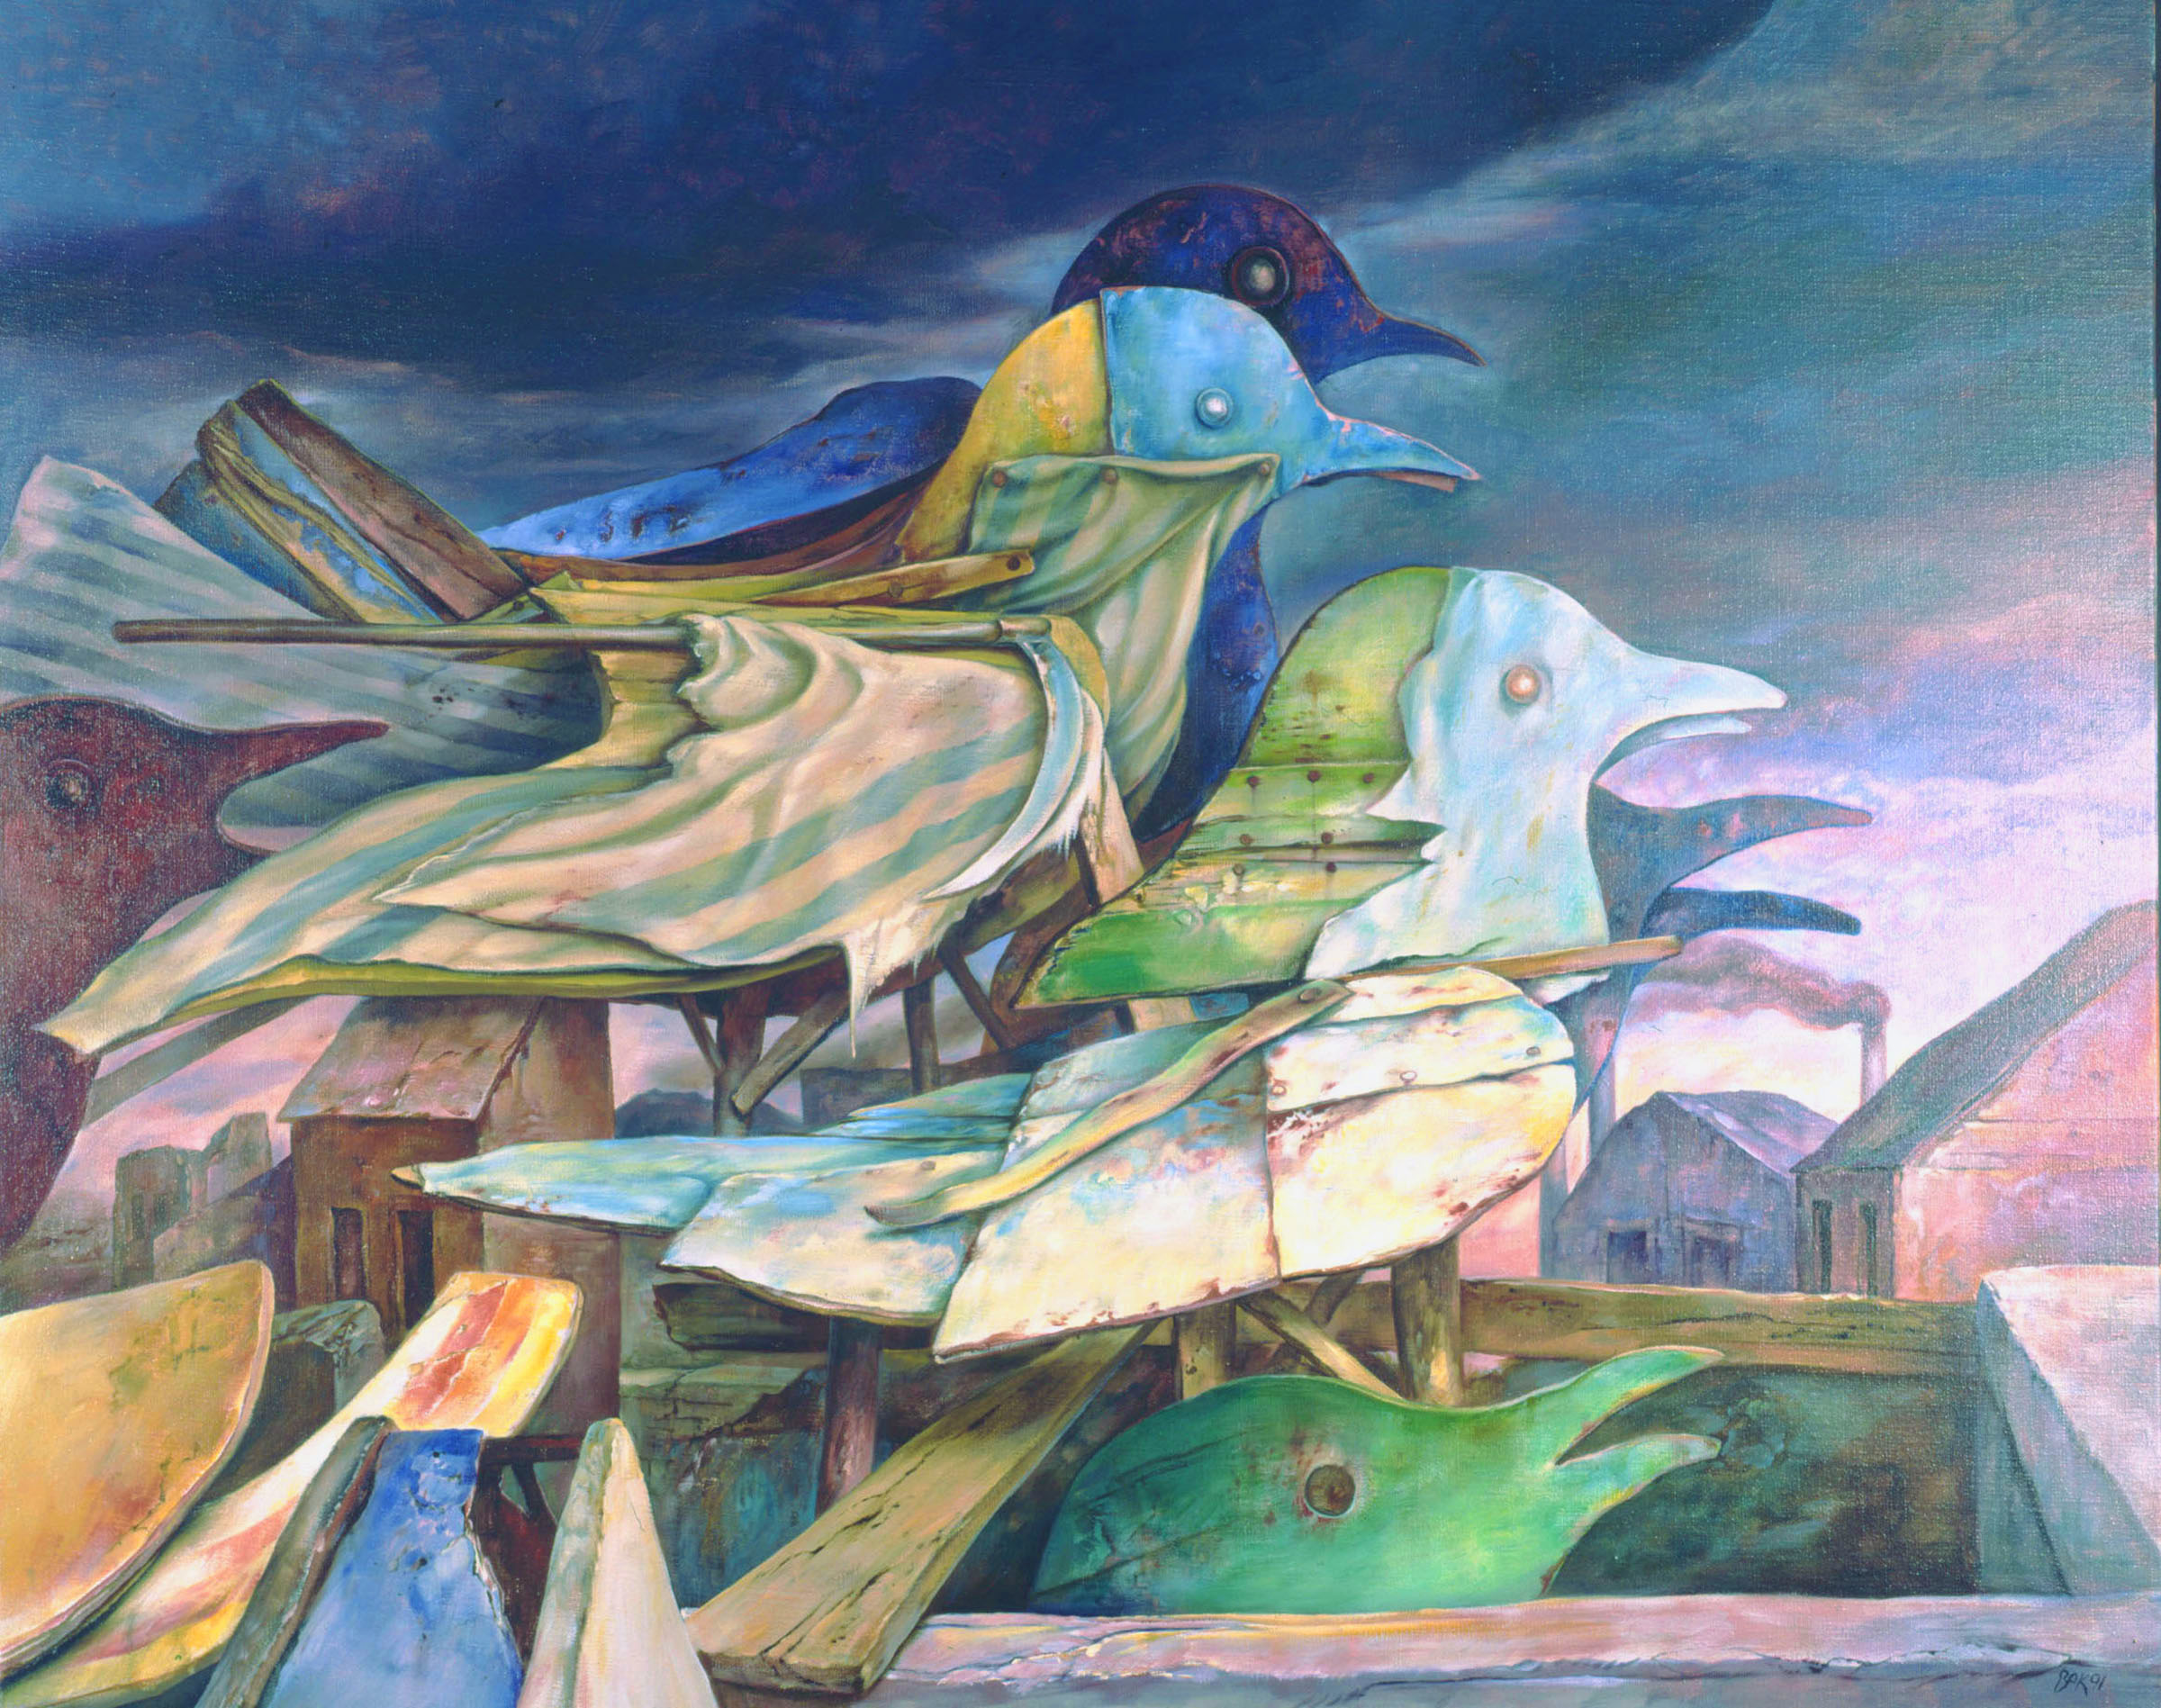 Guardians of Memory, 1991, oil on linen. Image courtesy of Pucker Gallery.